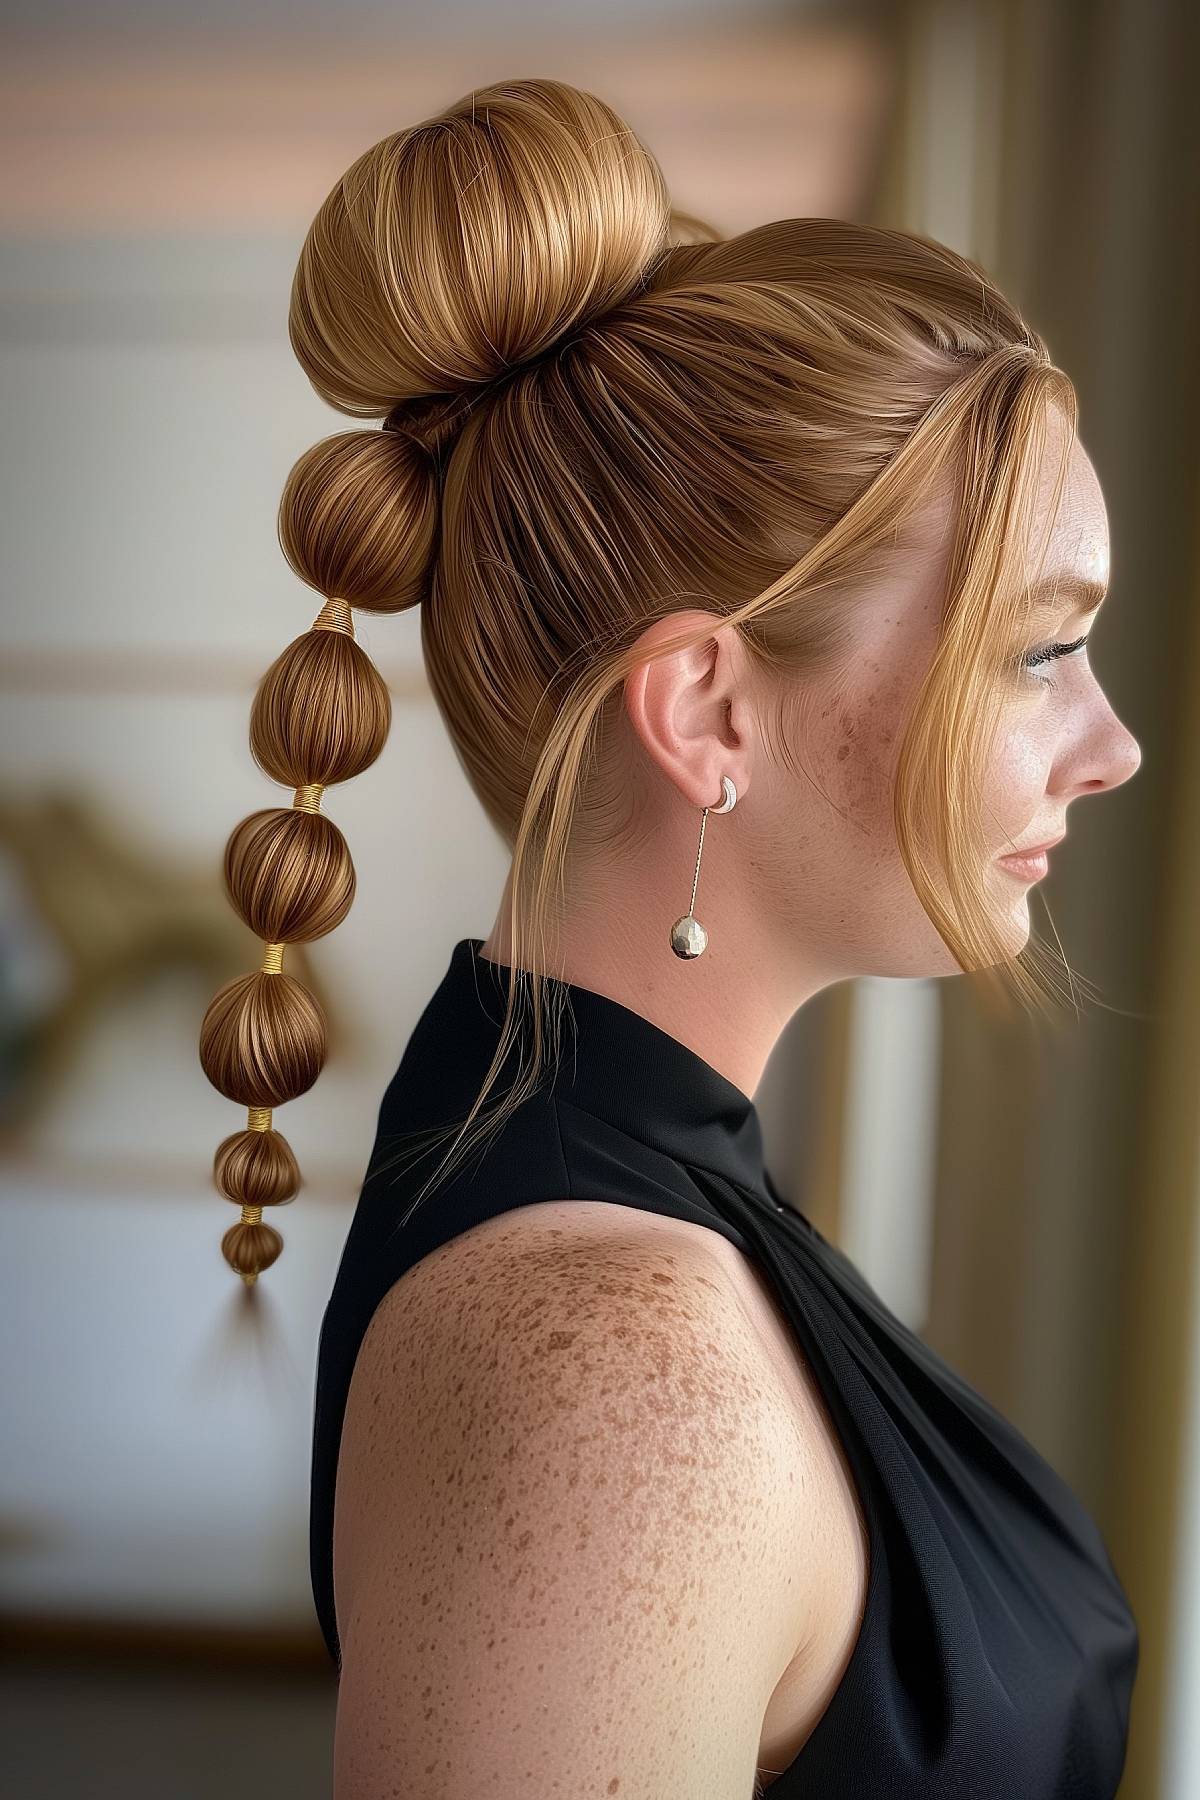 Elegantly crafted mid-length bubble braid, versatile for both casual and formal looks, ideal for maintaining a polished style.